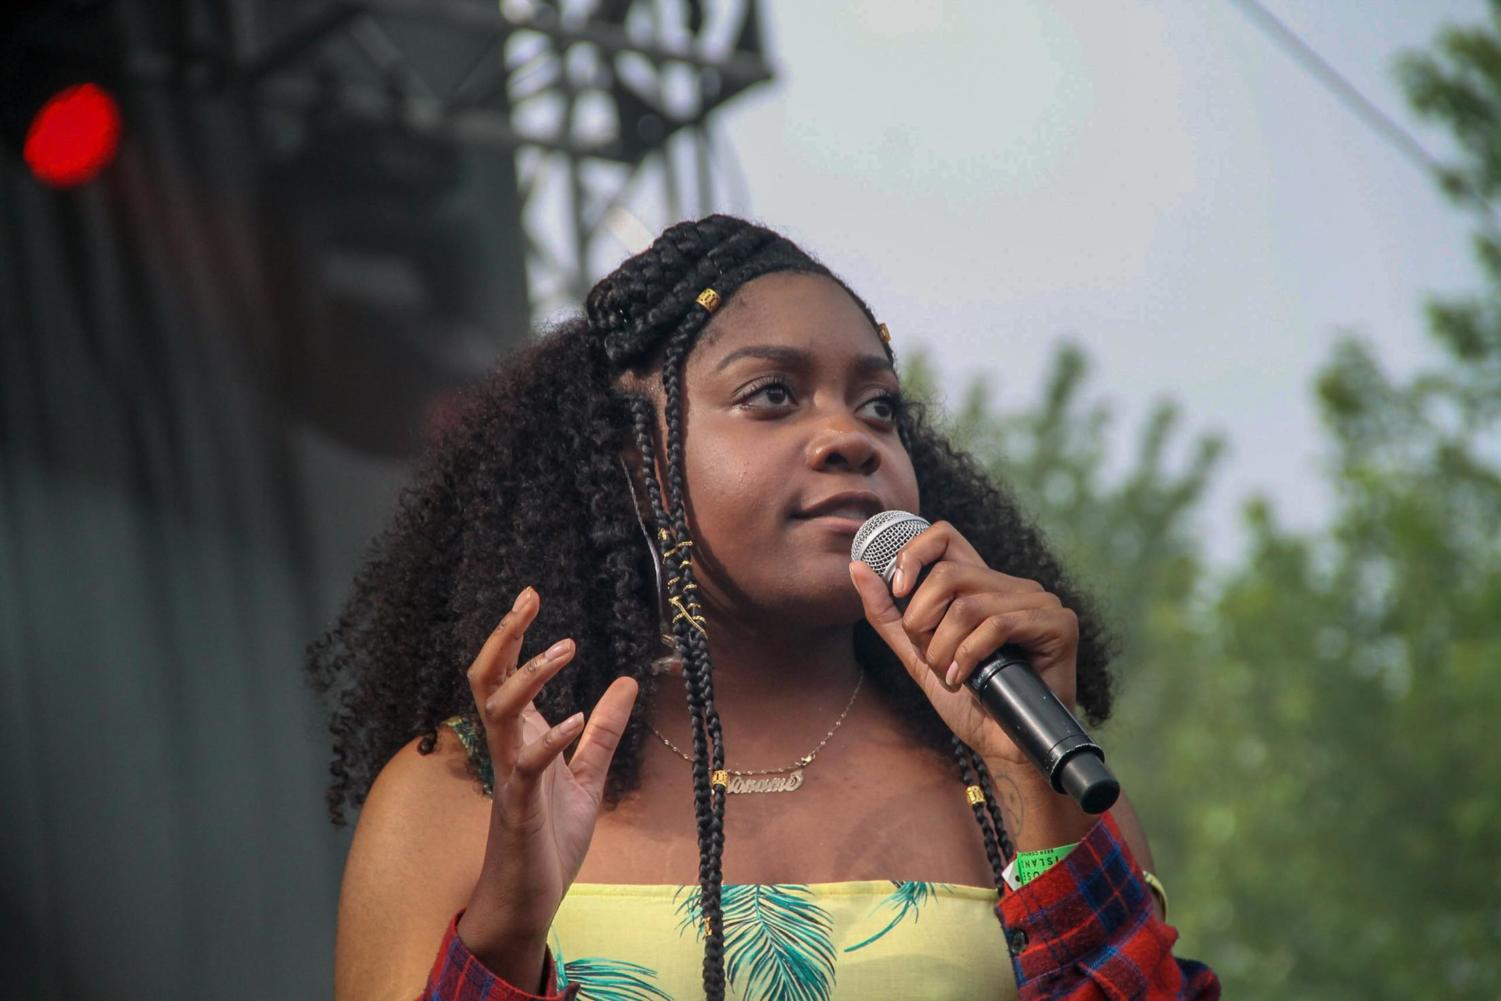 Noname performing on Sunday at the Pitchfork Music Festival.